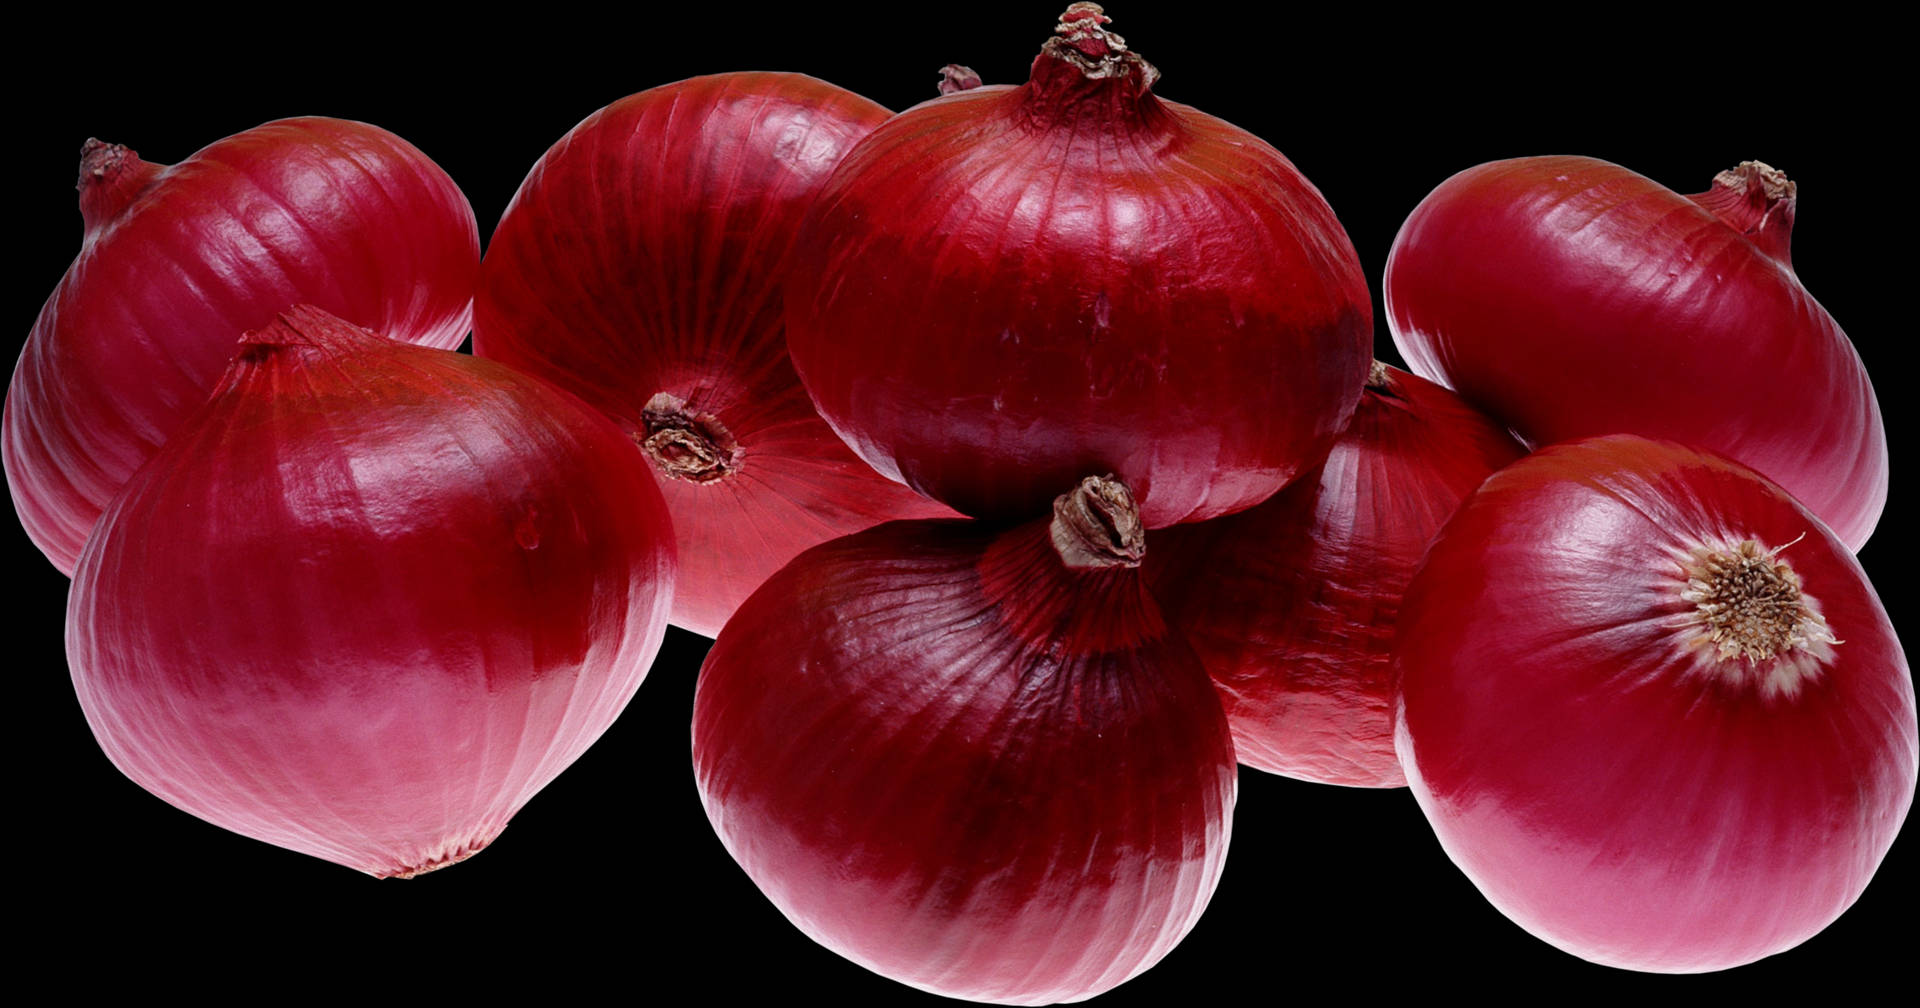 Bright Red Onions Vegetables Wallpaper